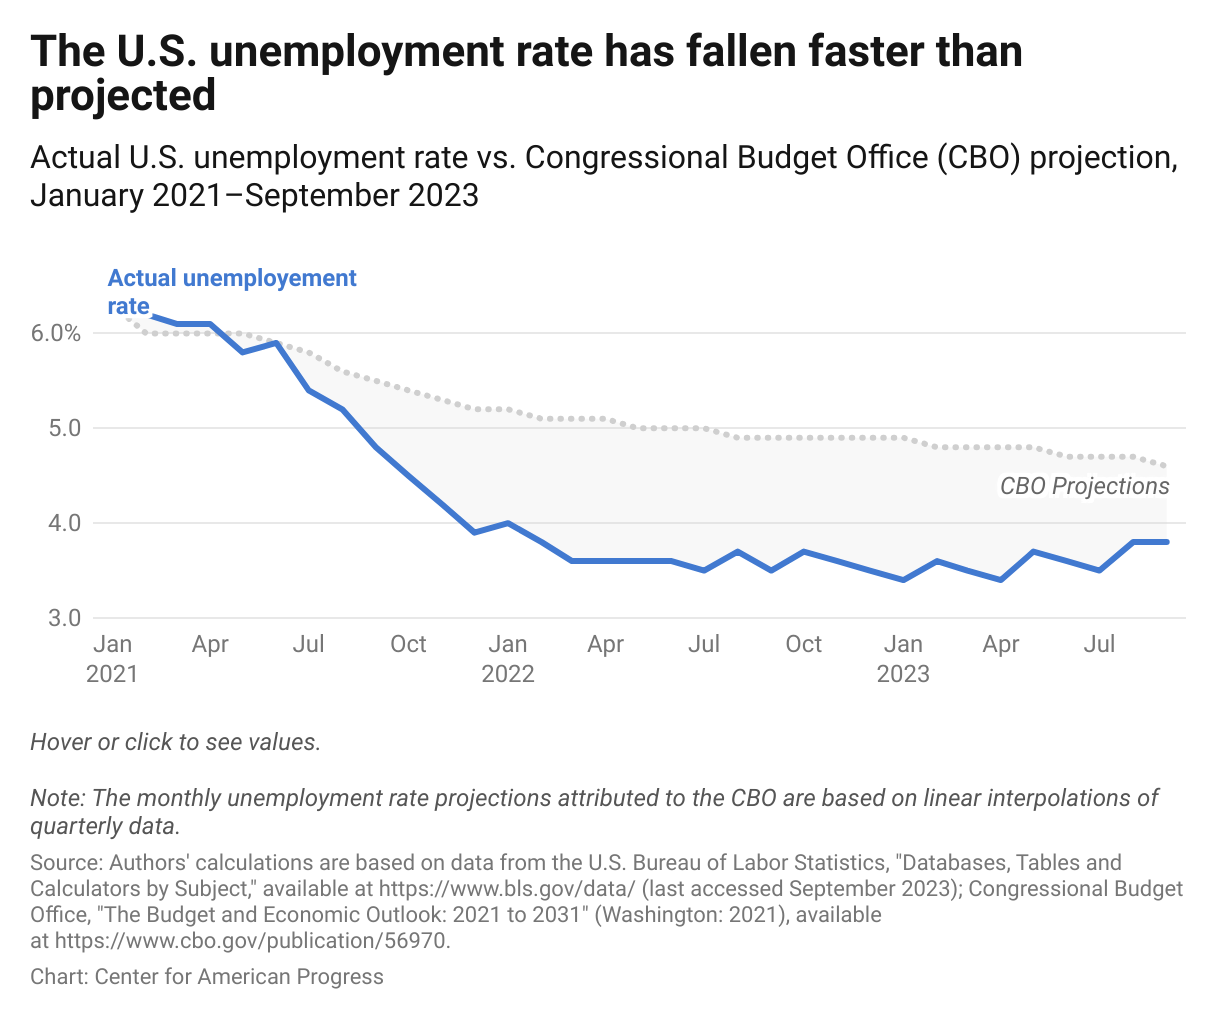 A line graph displaying the gap between projected unemployment rates and actual unemployment rates, showing that the actual unemployment rate in September 2023 was 0.8 percentage points lower than projected.